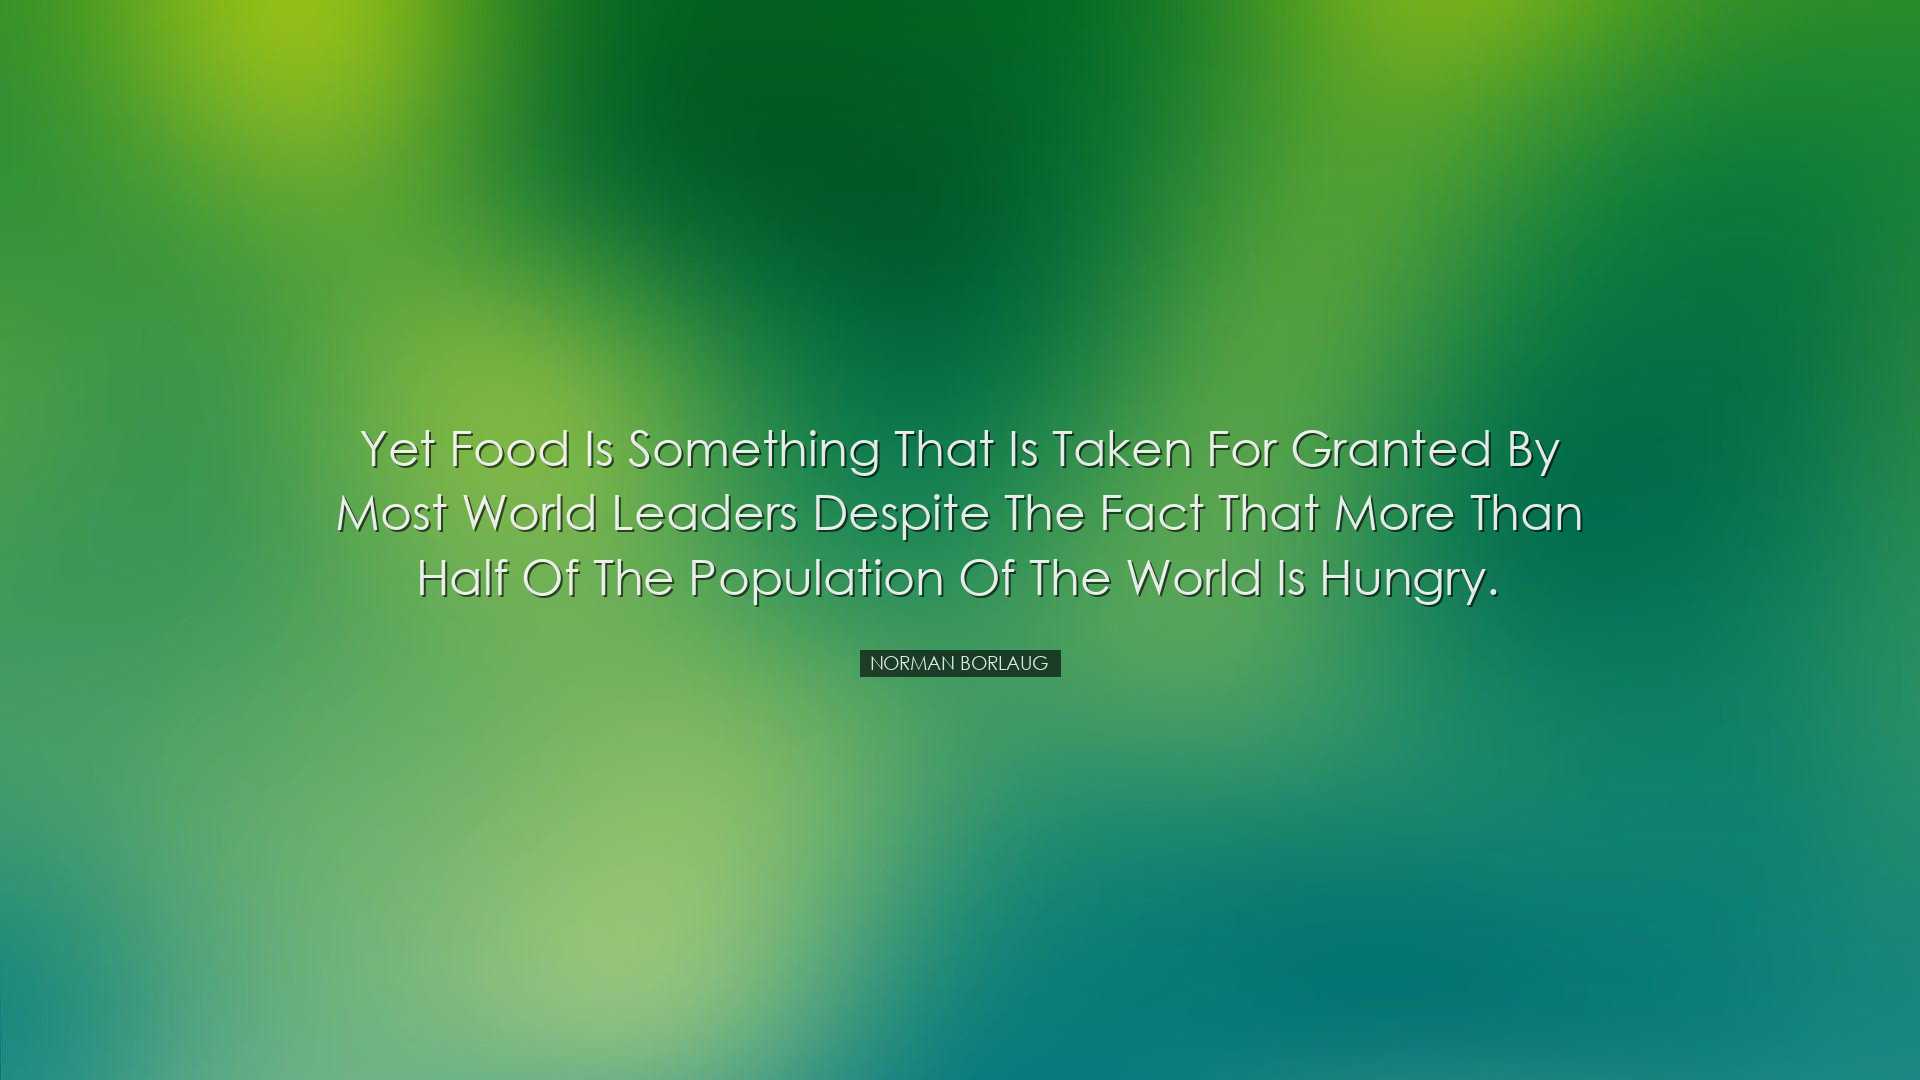 Yet food is something that is taken for granted by most world lead